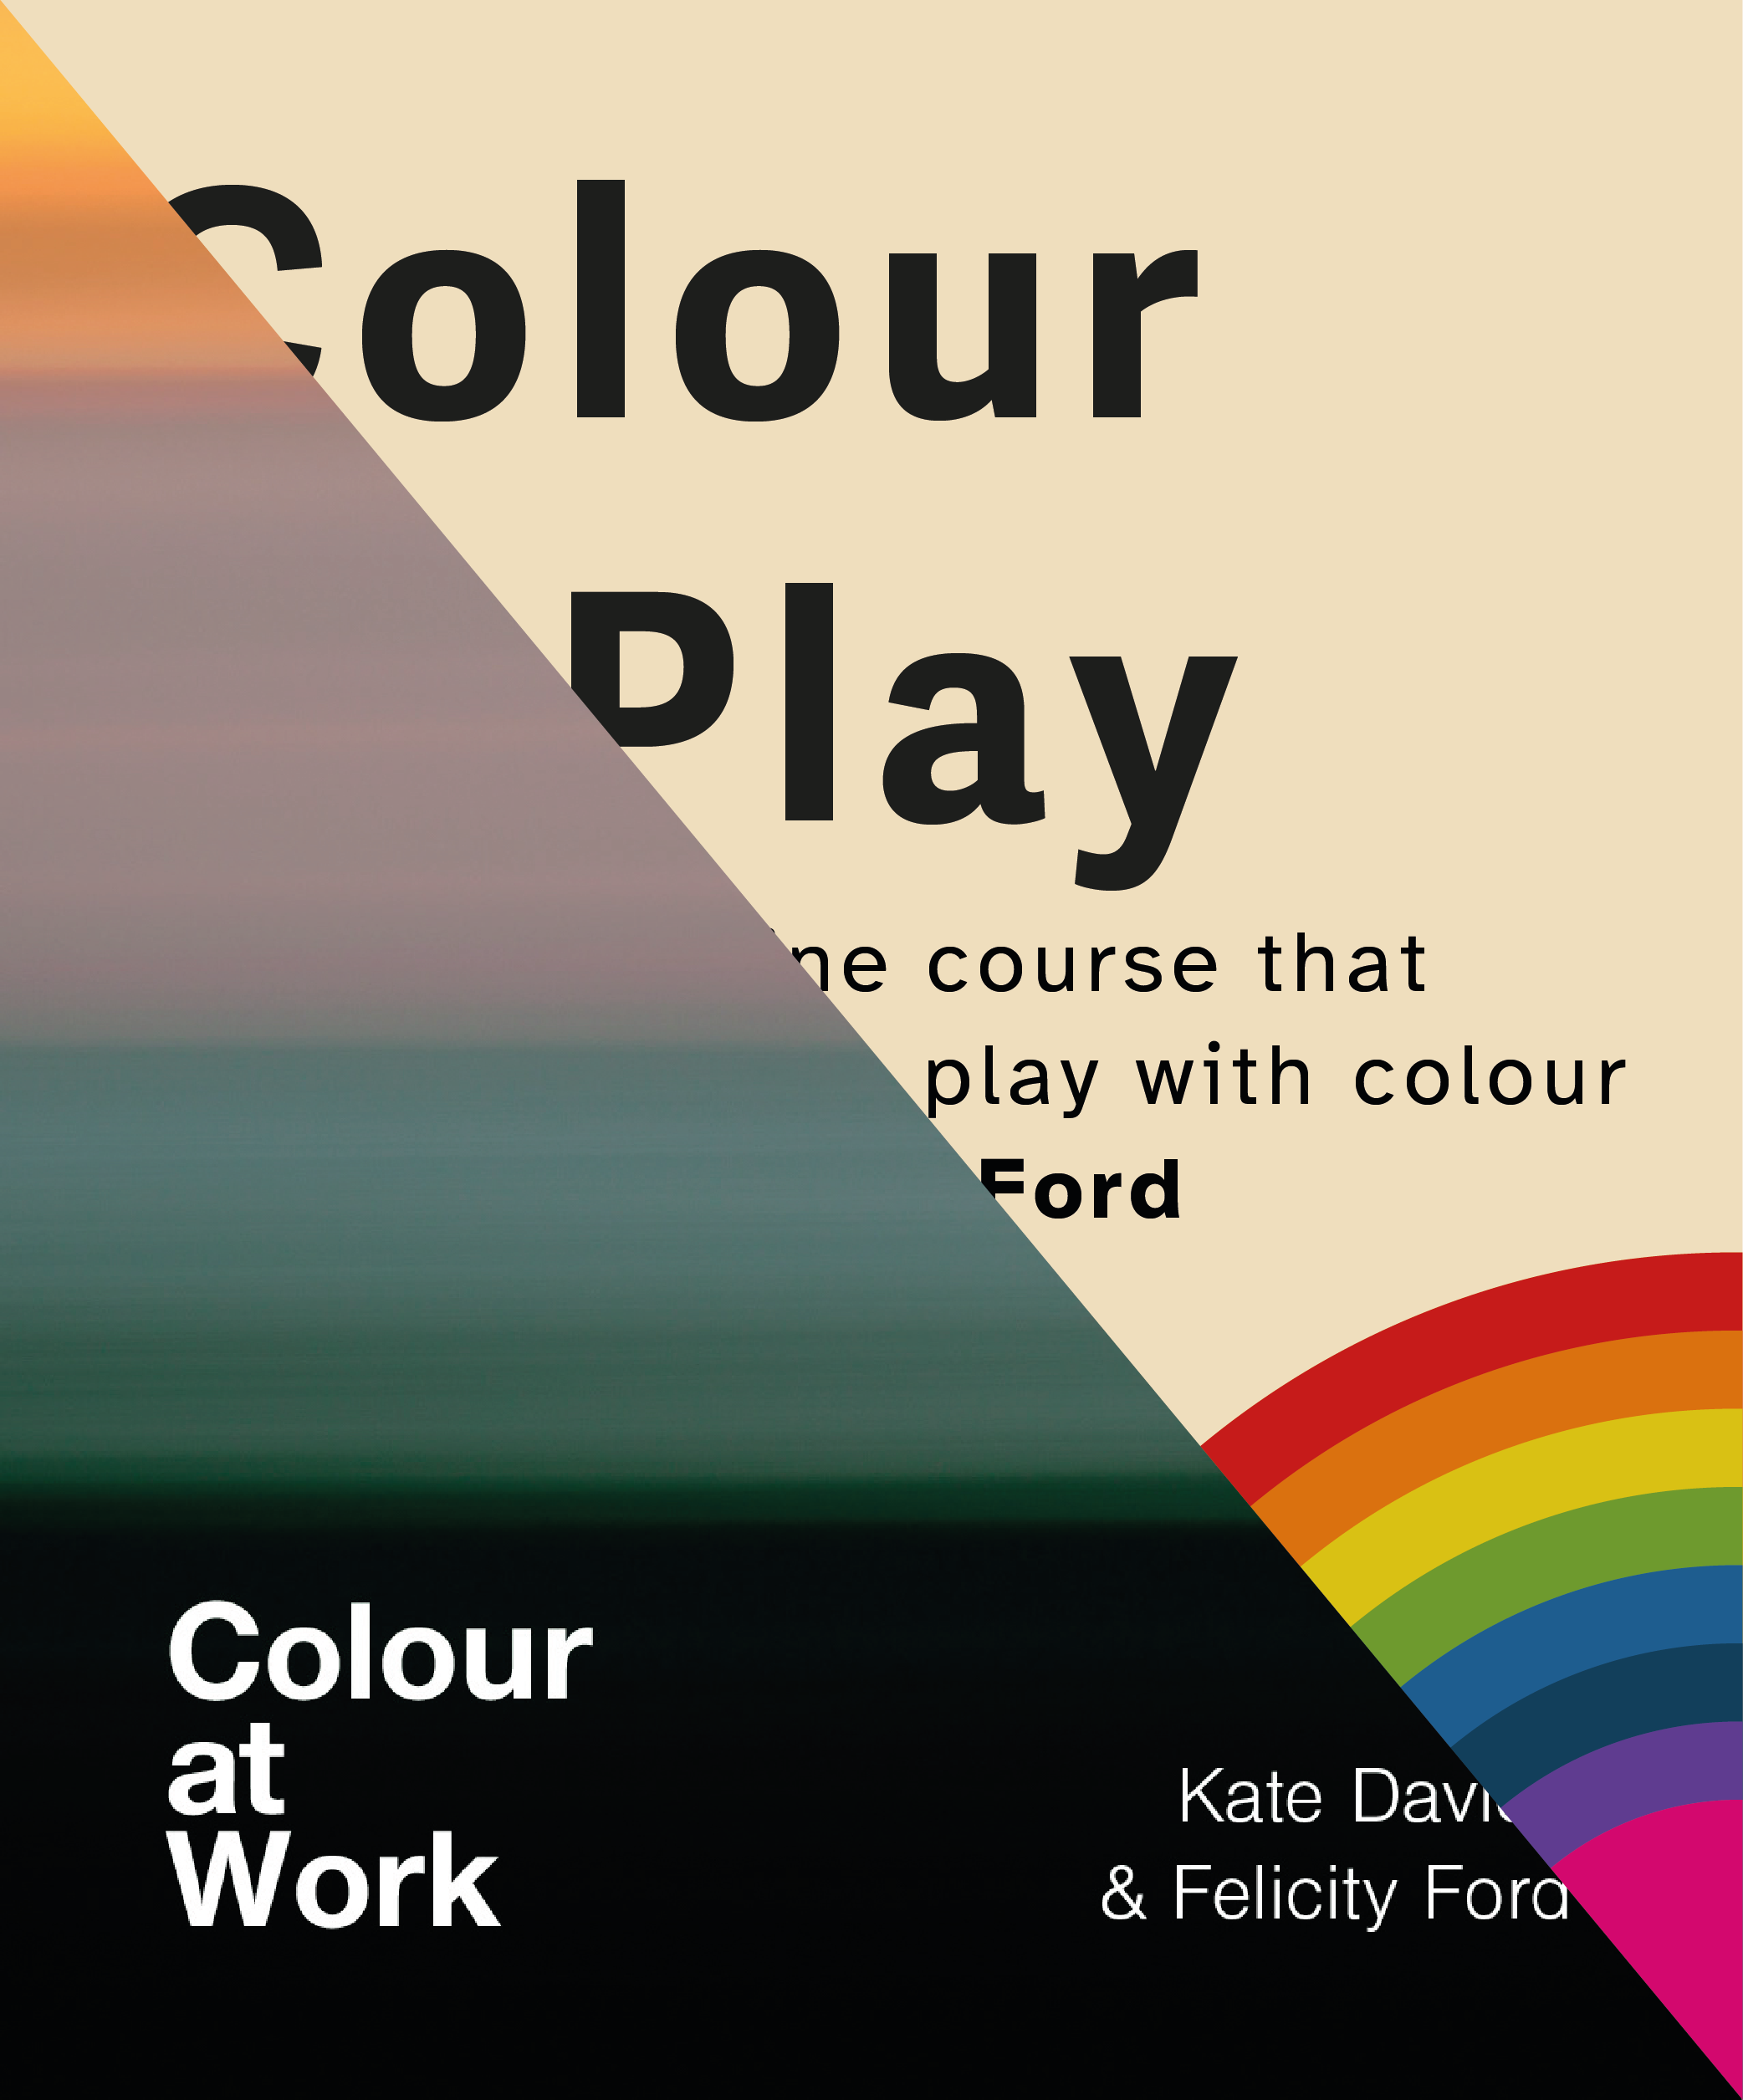 combined image of Colour at Work and Colour at Play